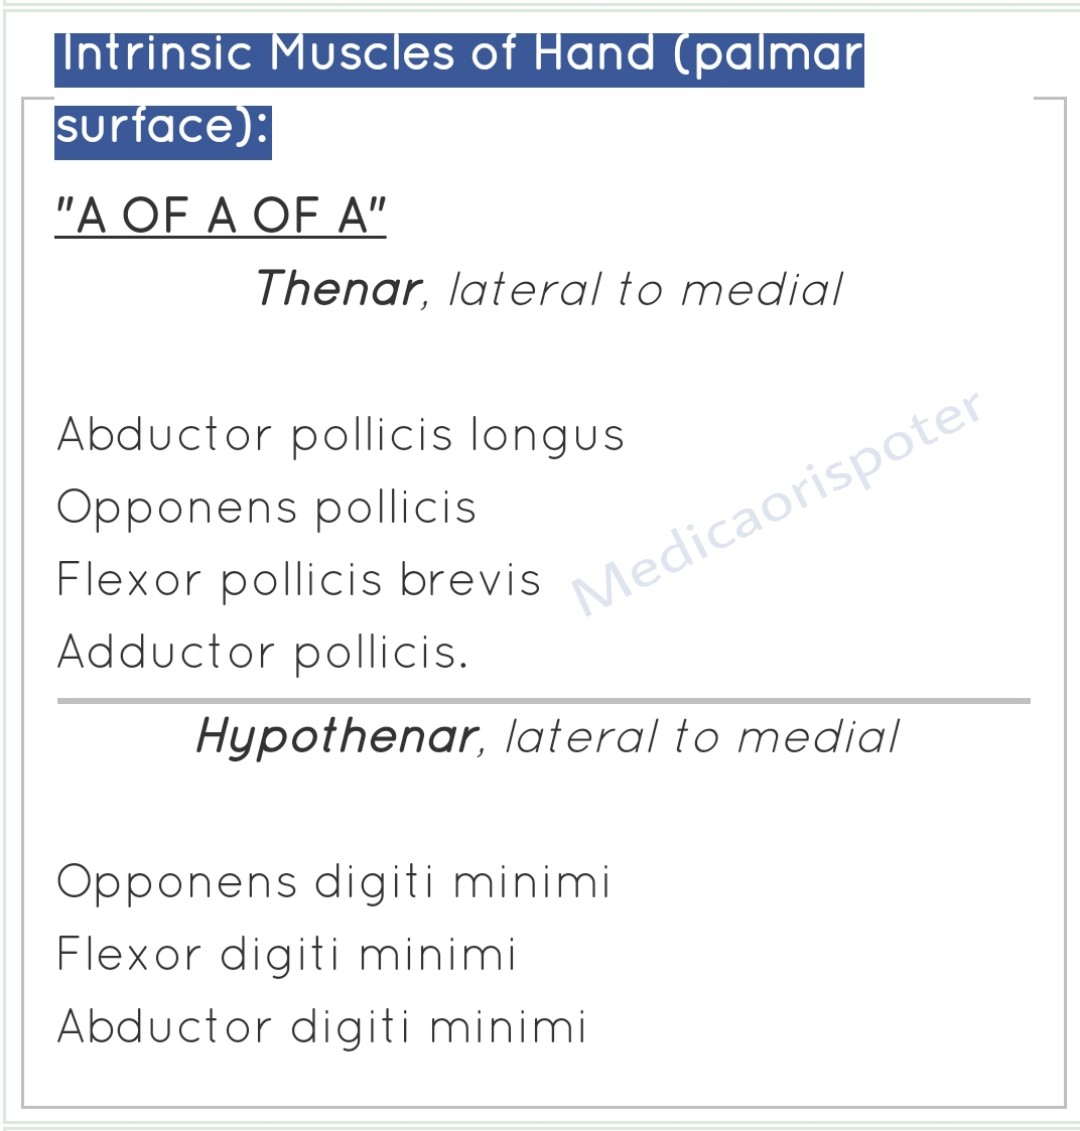 preview of Intrinsic Muscles of the Hand Palmer Surface.jpg